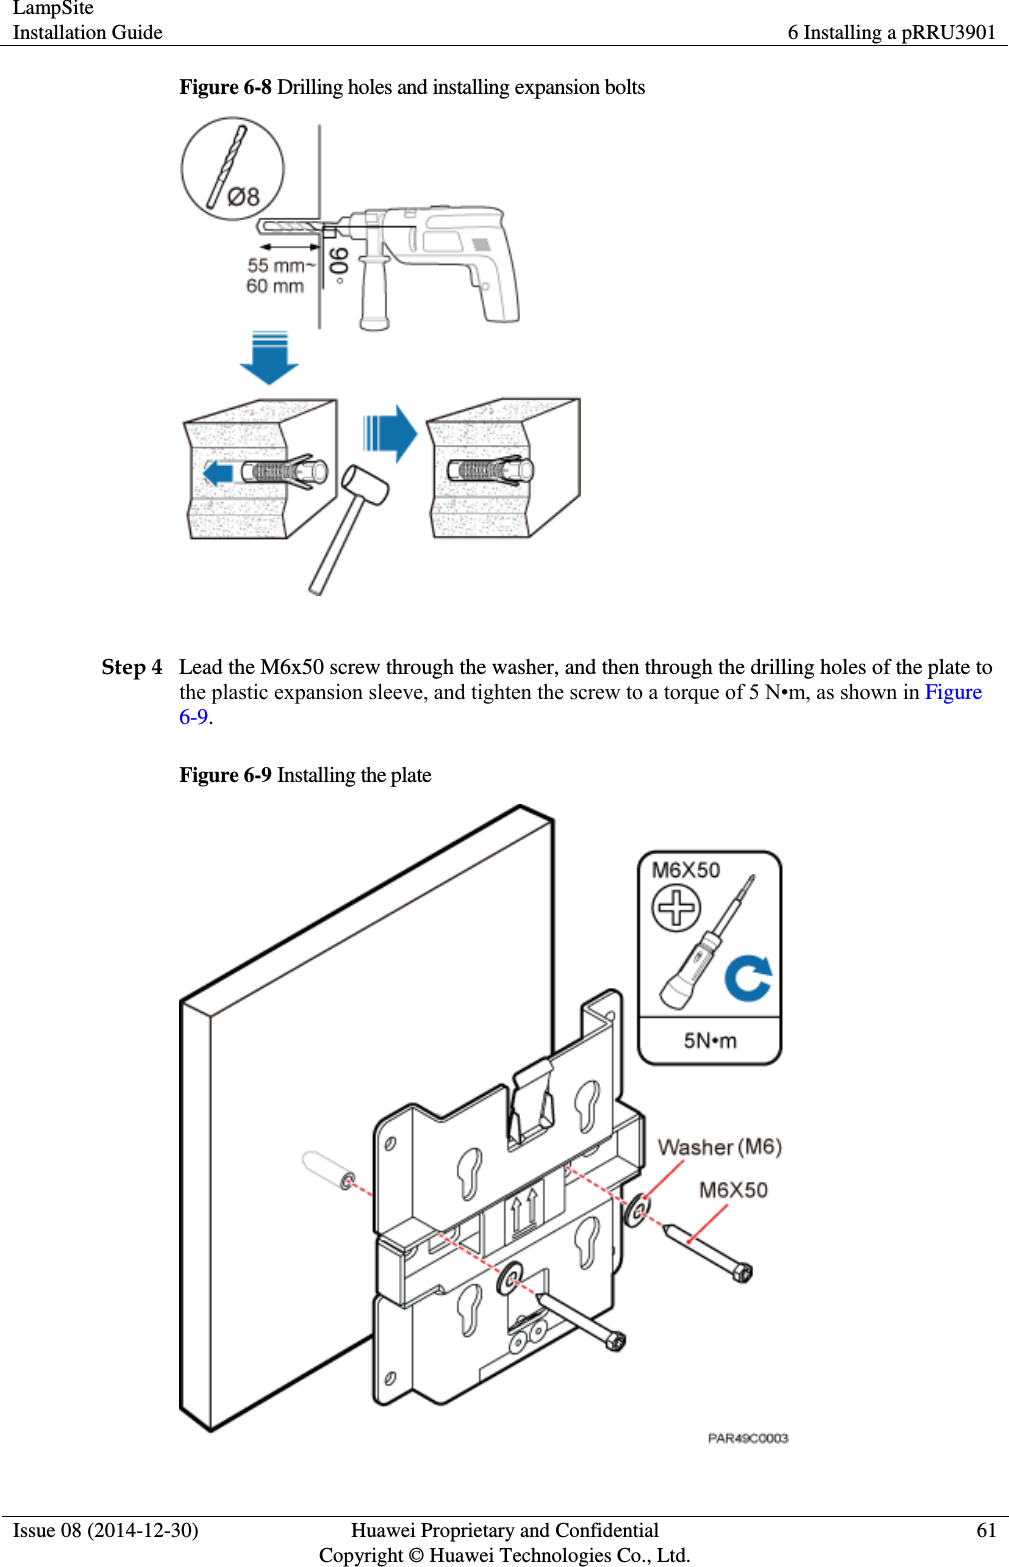 LampSite Installation Guide 6 Installing a pRRU3901  Issue 08 (2014-12-30) Huawei Proprietary and Confidential                                     Copyright © Huawei Technologies Co., Ltd. 61  Figure 6-8 Drilling holes and installing expansion bolts   Step 4 Lead the M6x50 screw through the washer, and then through the drilling holes of the plate to the plastic expansion sleeve, and tighten the screw to a torque of 5 N•m, as shown in Figure 6-9. Figure 6-9 Installing the plate  